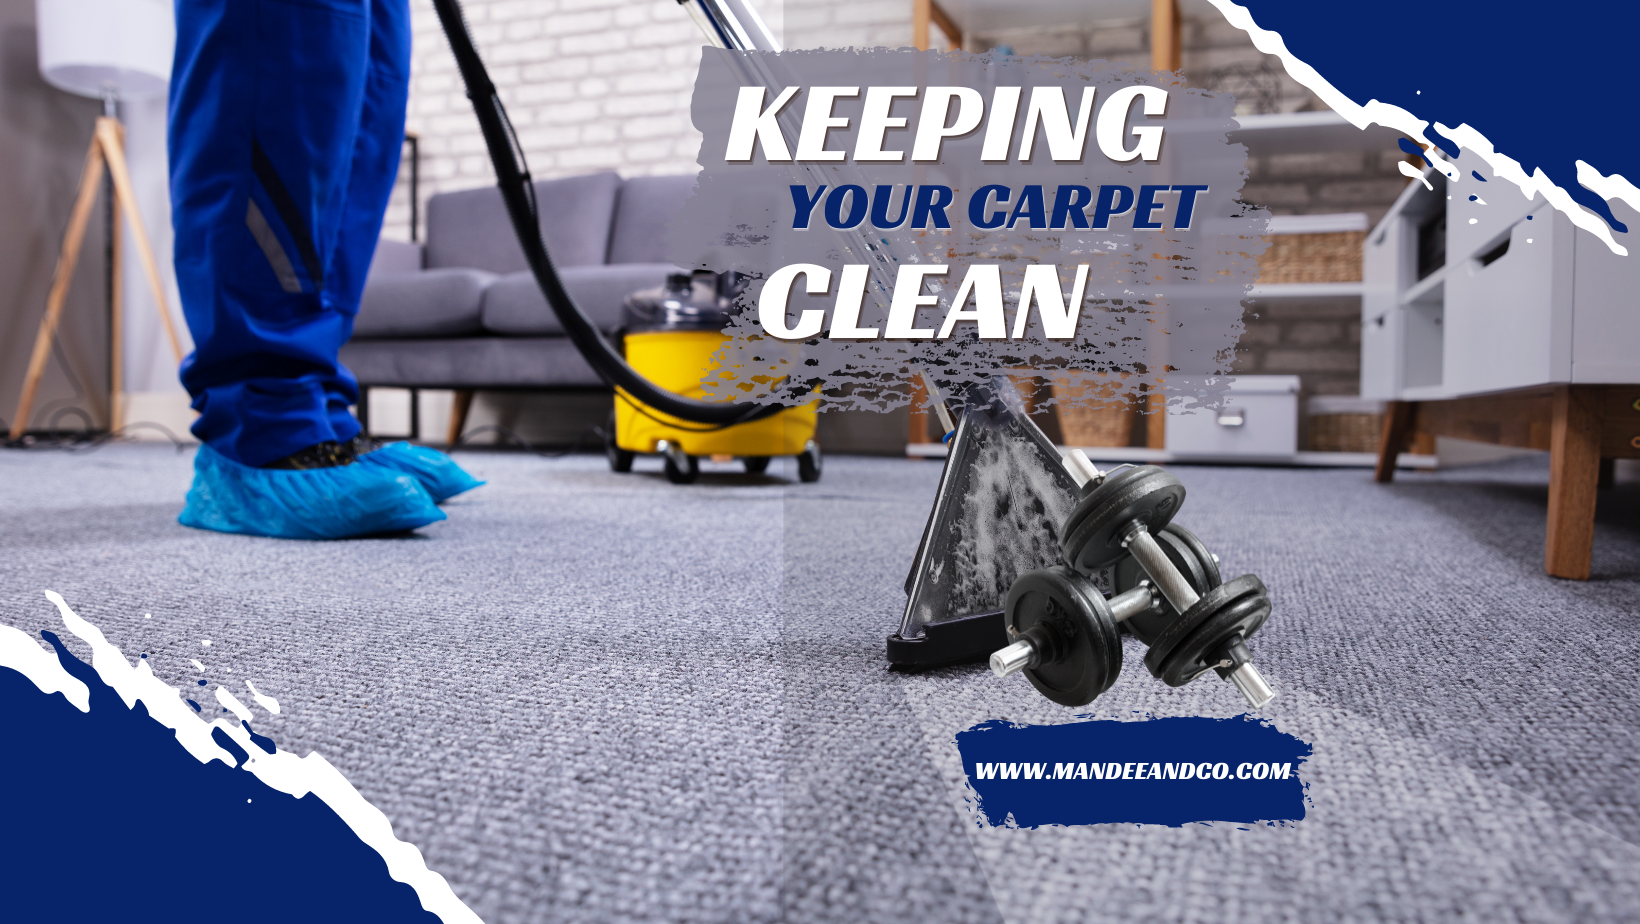 Keeping your carpet clean